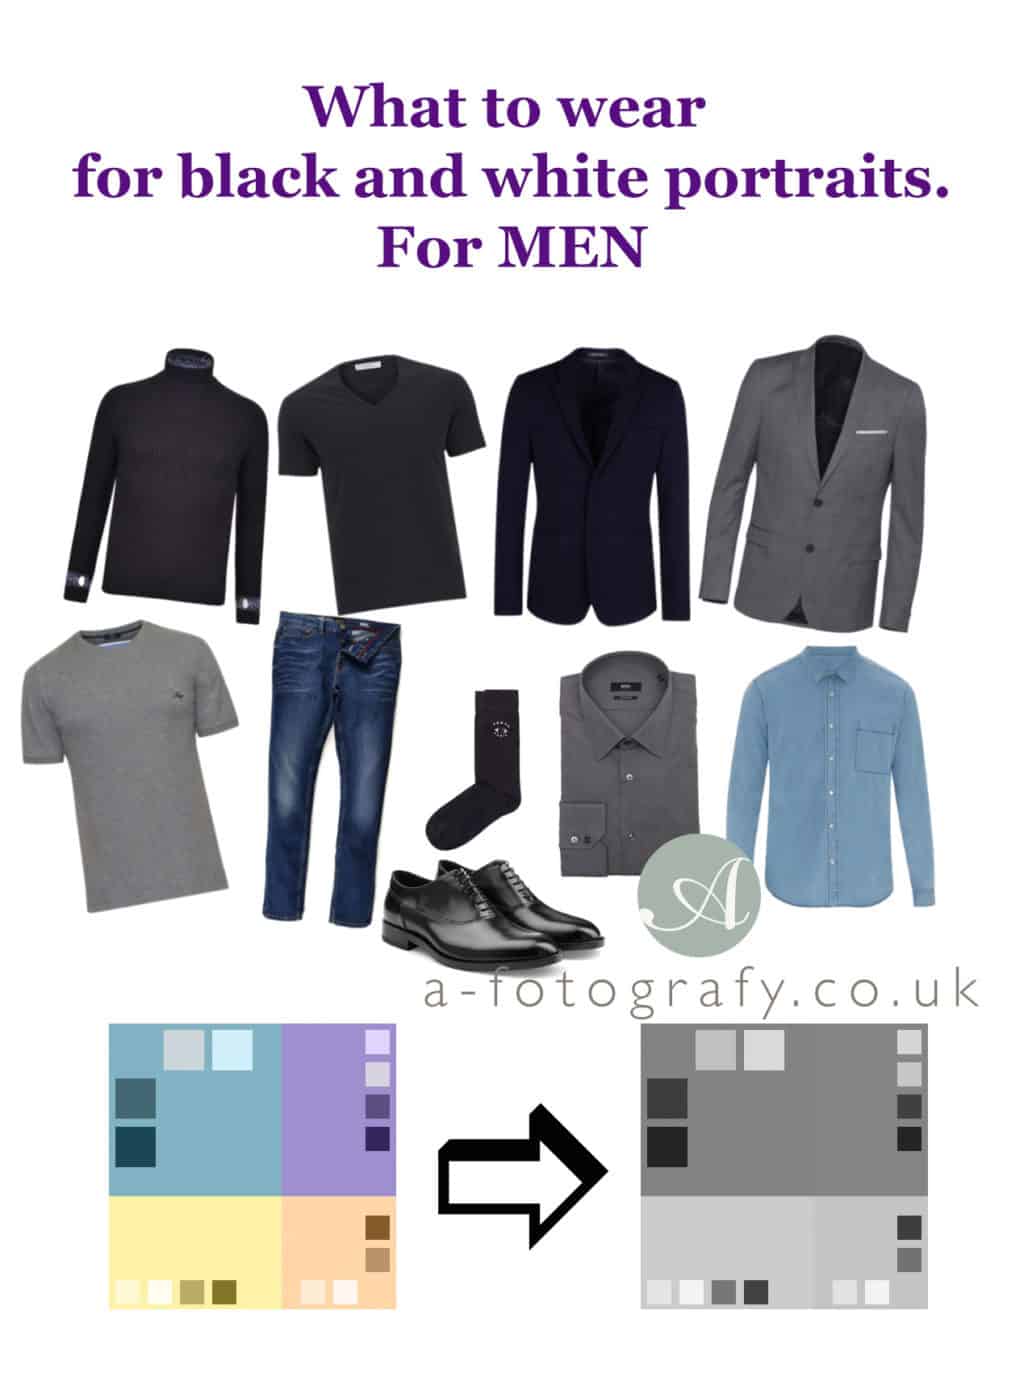 What to wear for black and white portraits for men